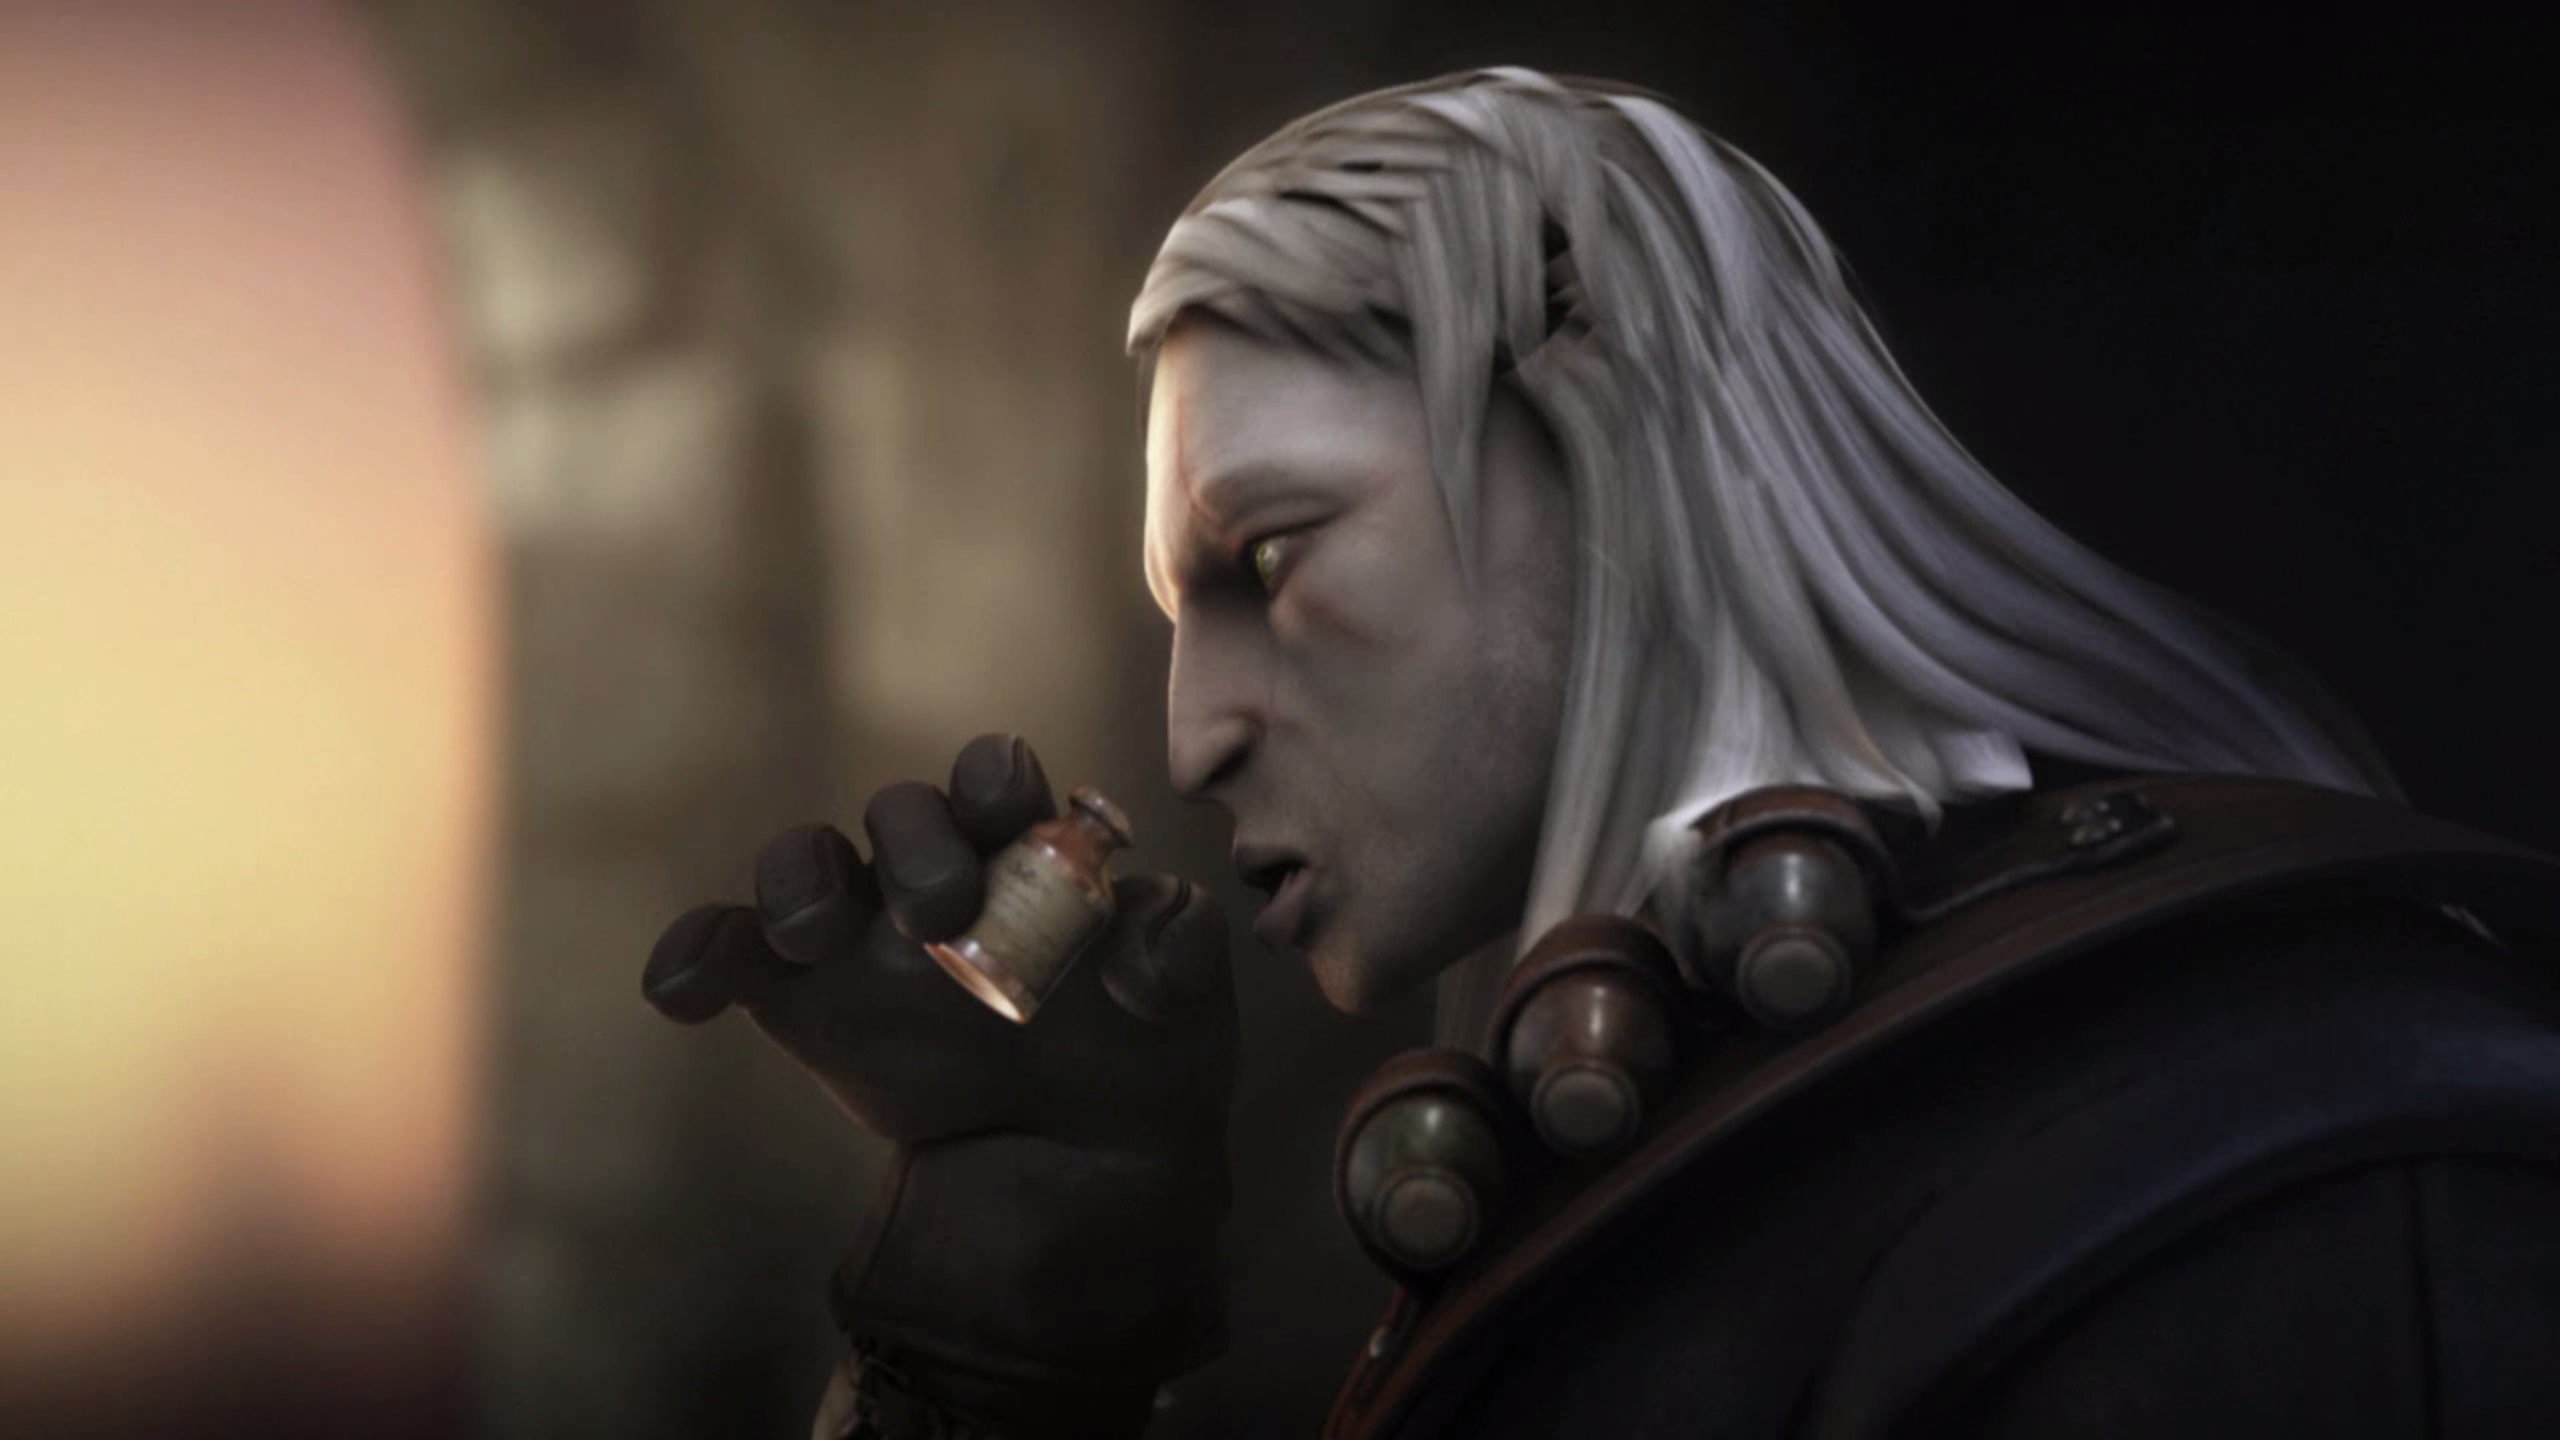 The Witcher - game opening cinematic of Geralt drinking a potion before a fight